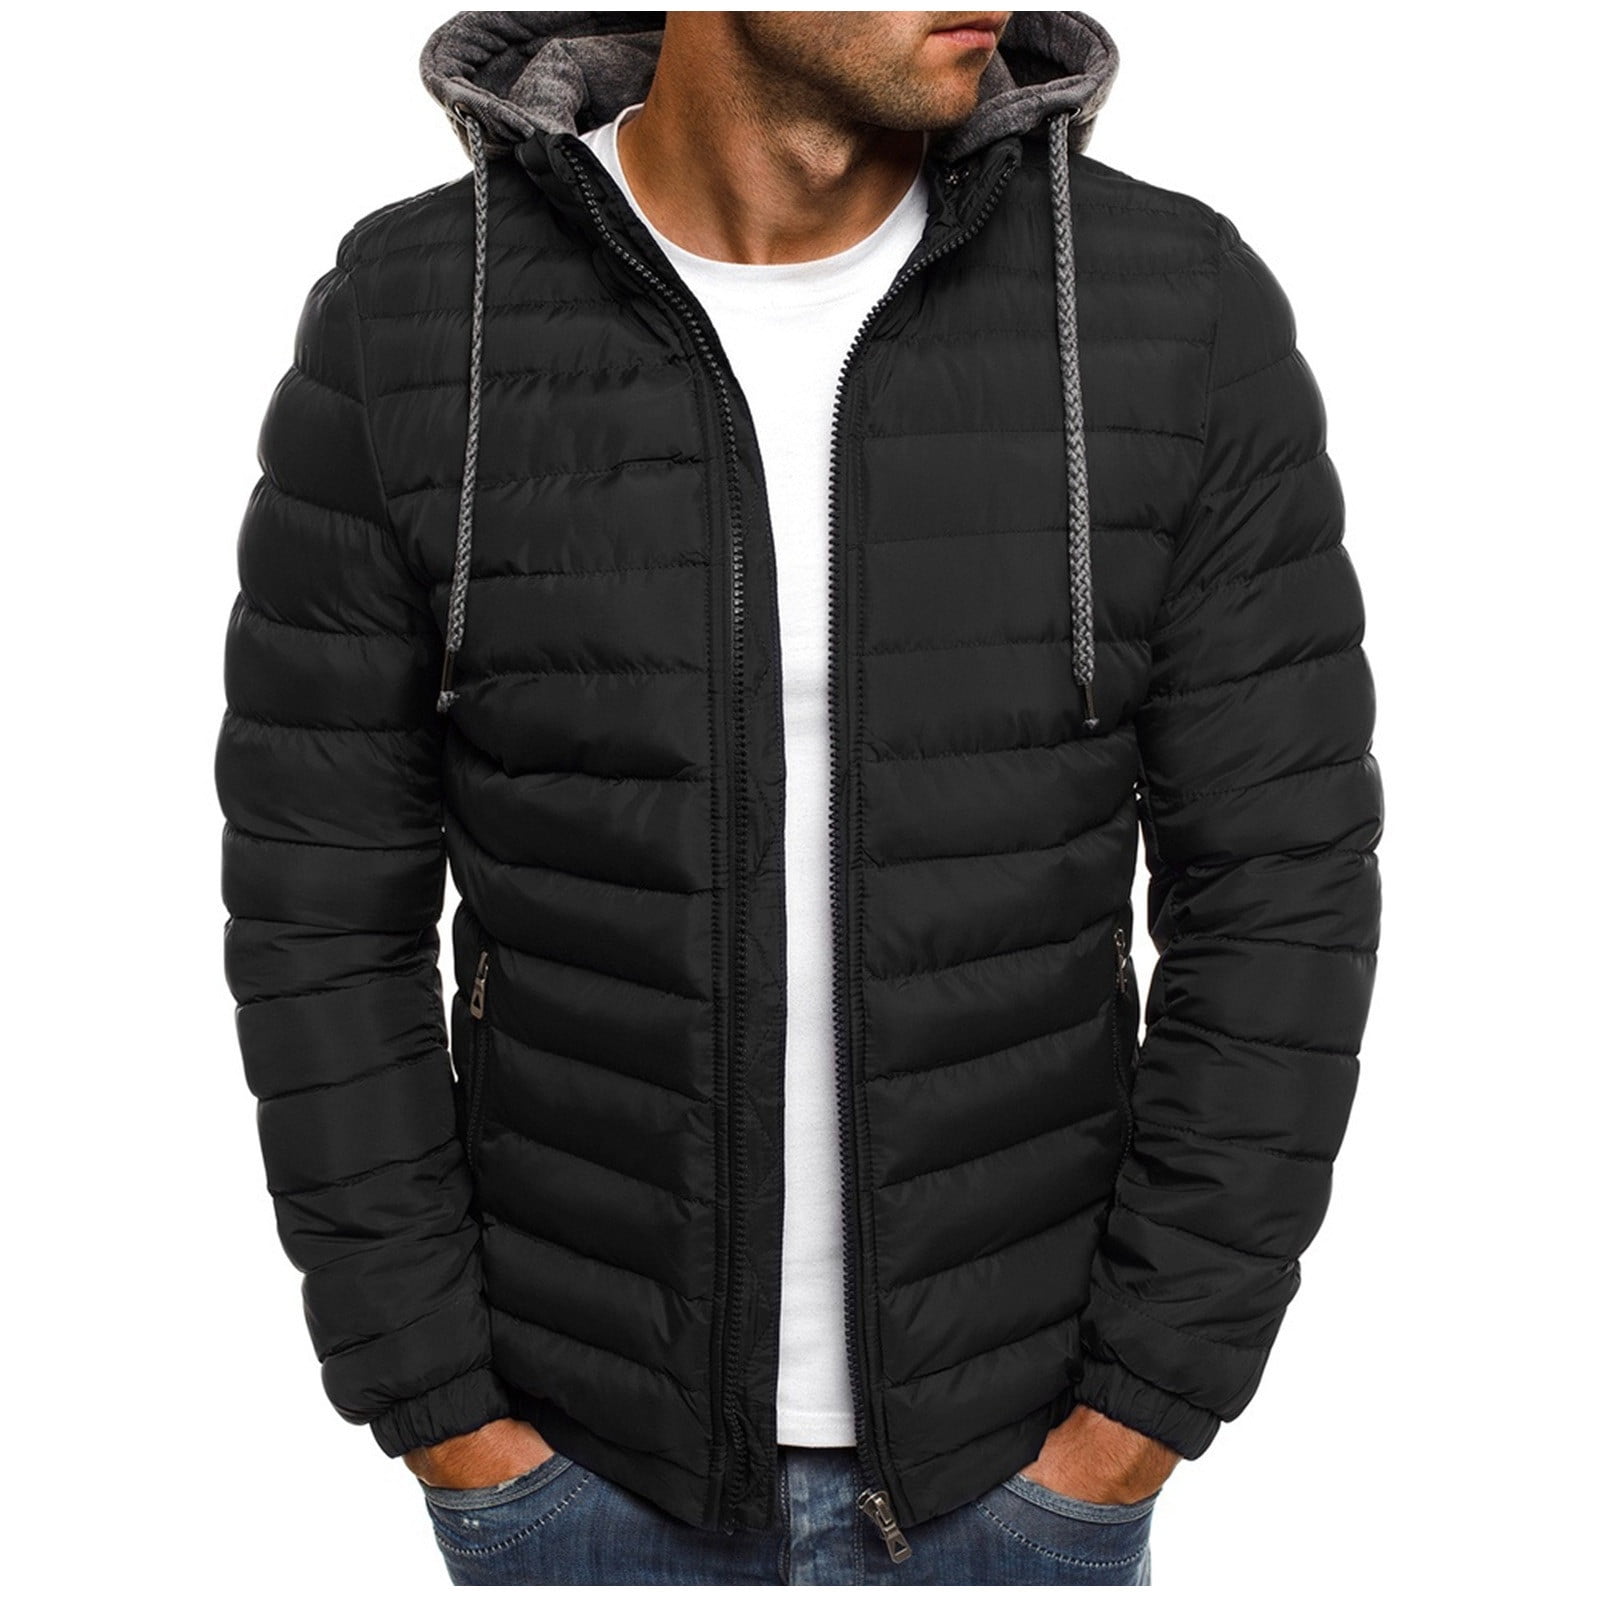 AOOCHASLIY Men's Solid Color Hooded Jacket Cotton Padded Jacket Fashion ...